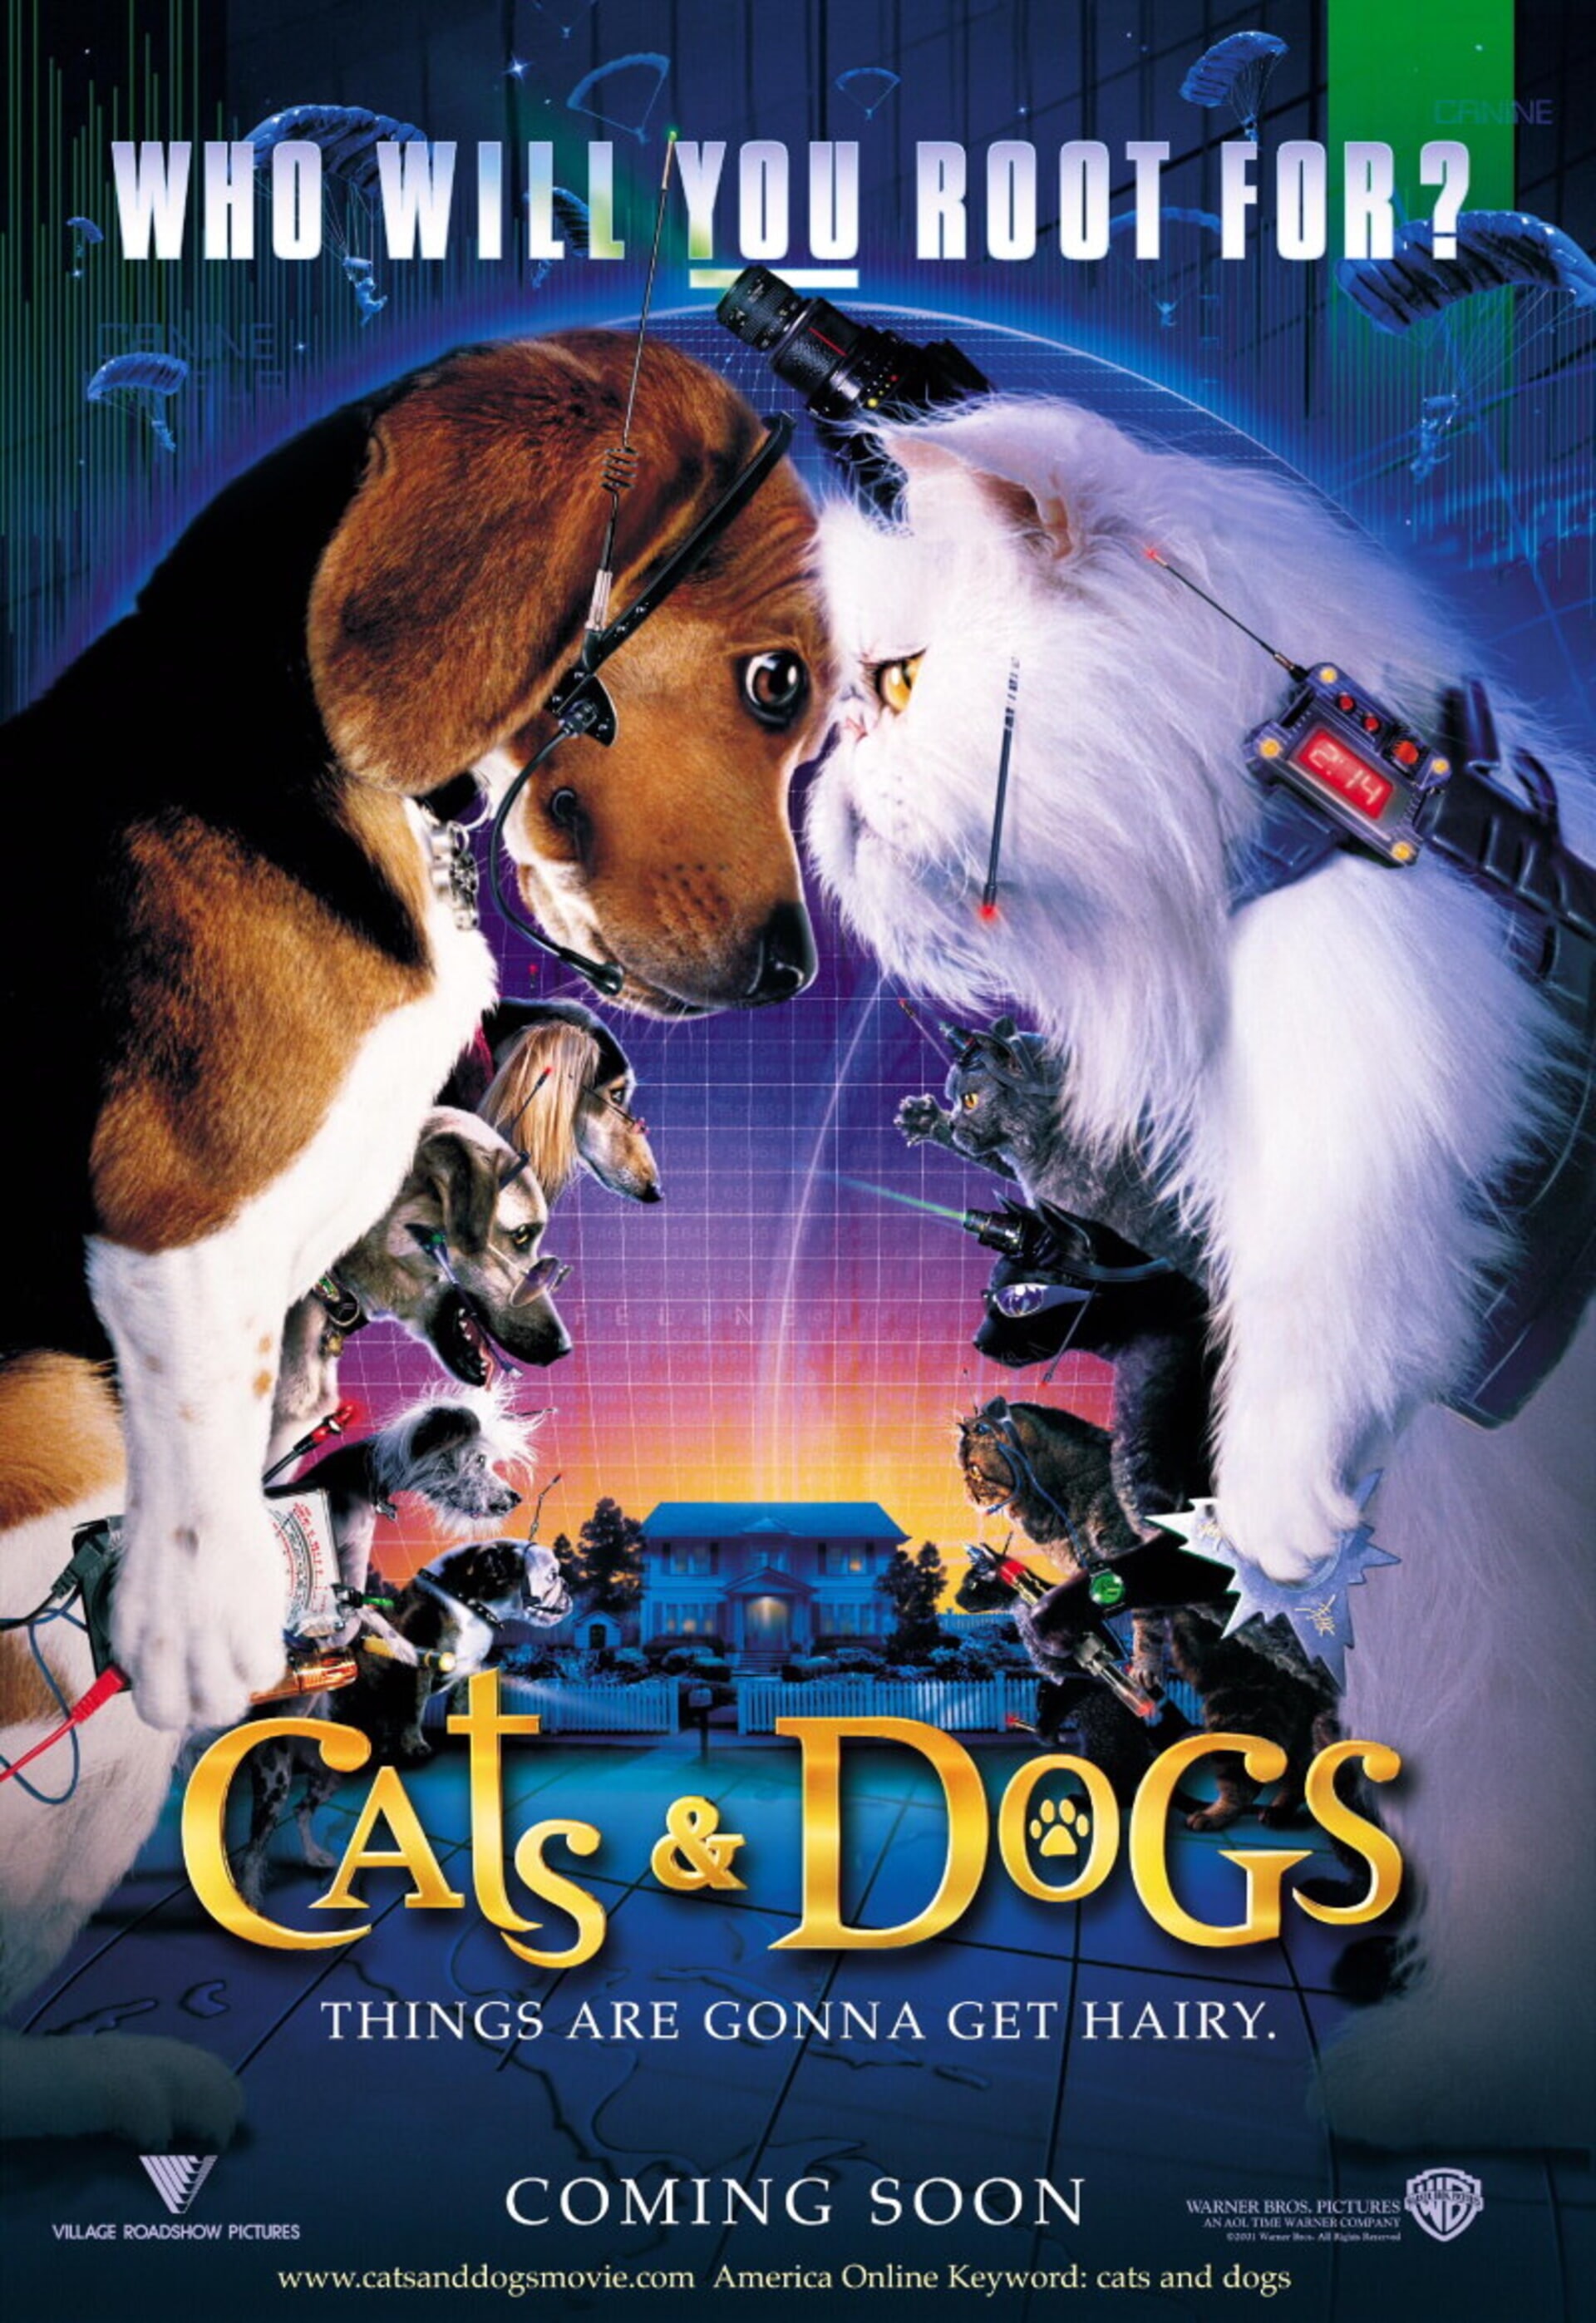 Cats & Dogs Movies